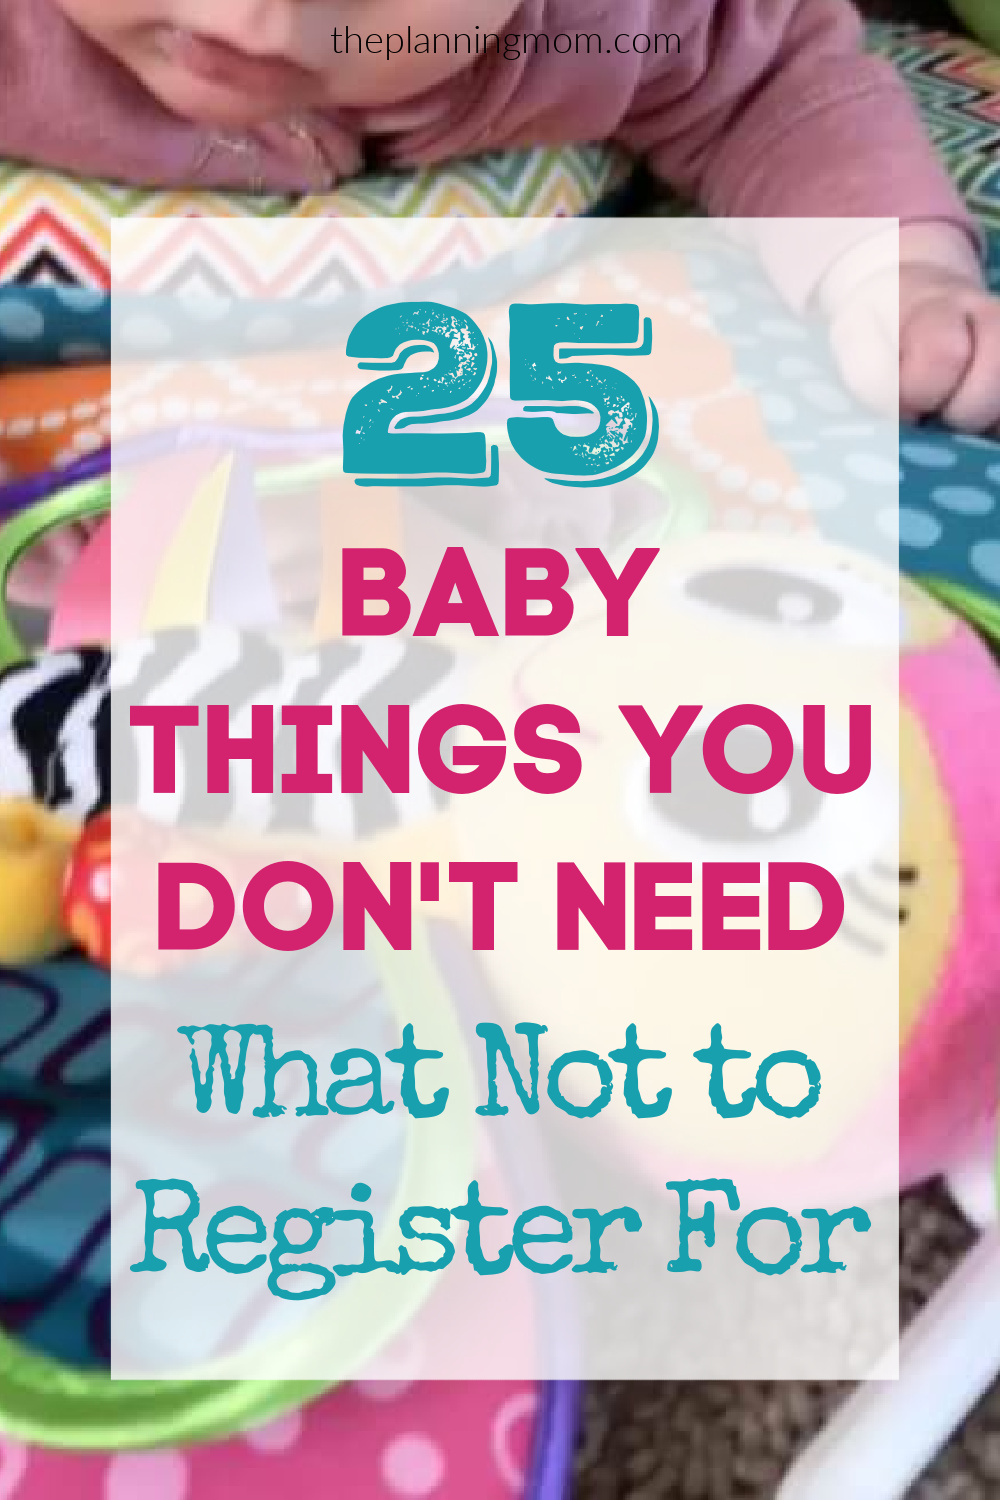 https://www.theplanningmom.com/wp-content/uploads/25-Baby-things-you-dont-need-what-not-to-register-for-2.jpg